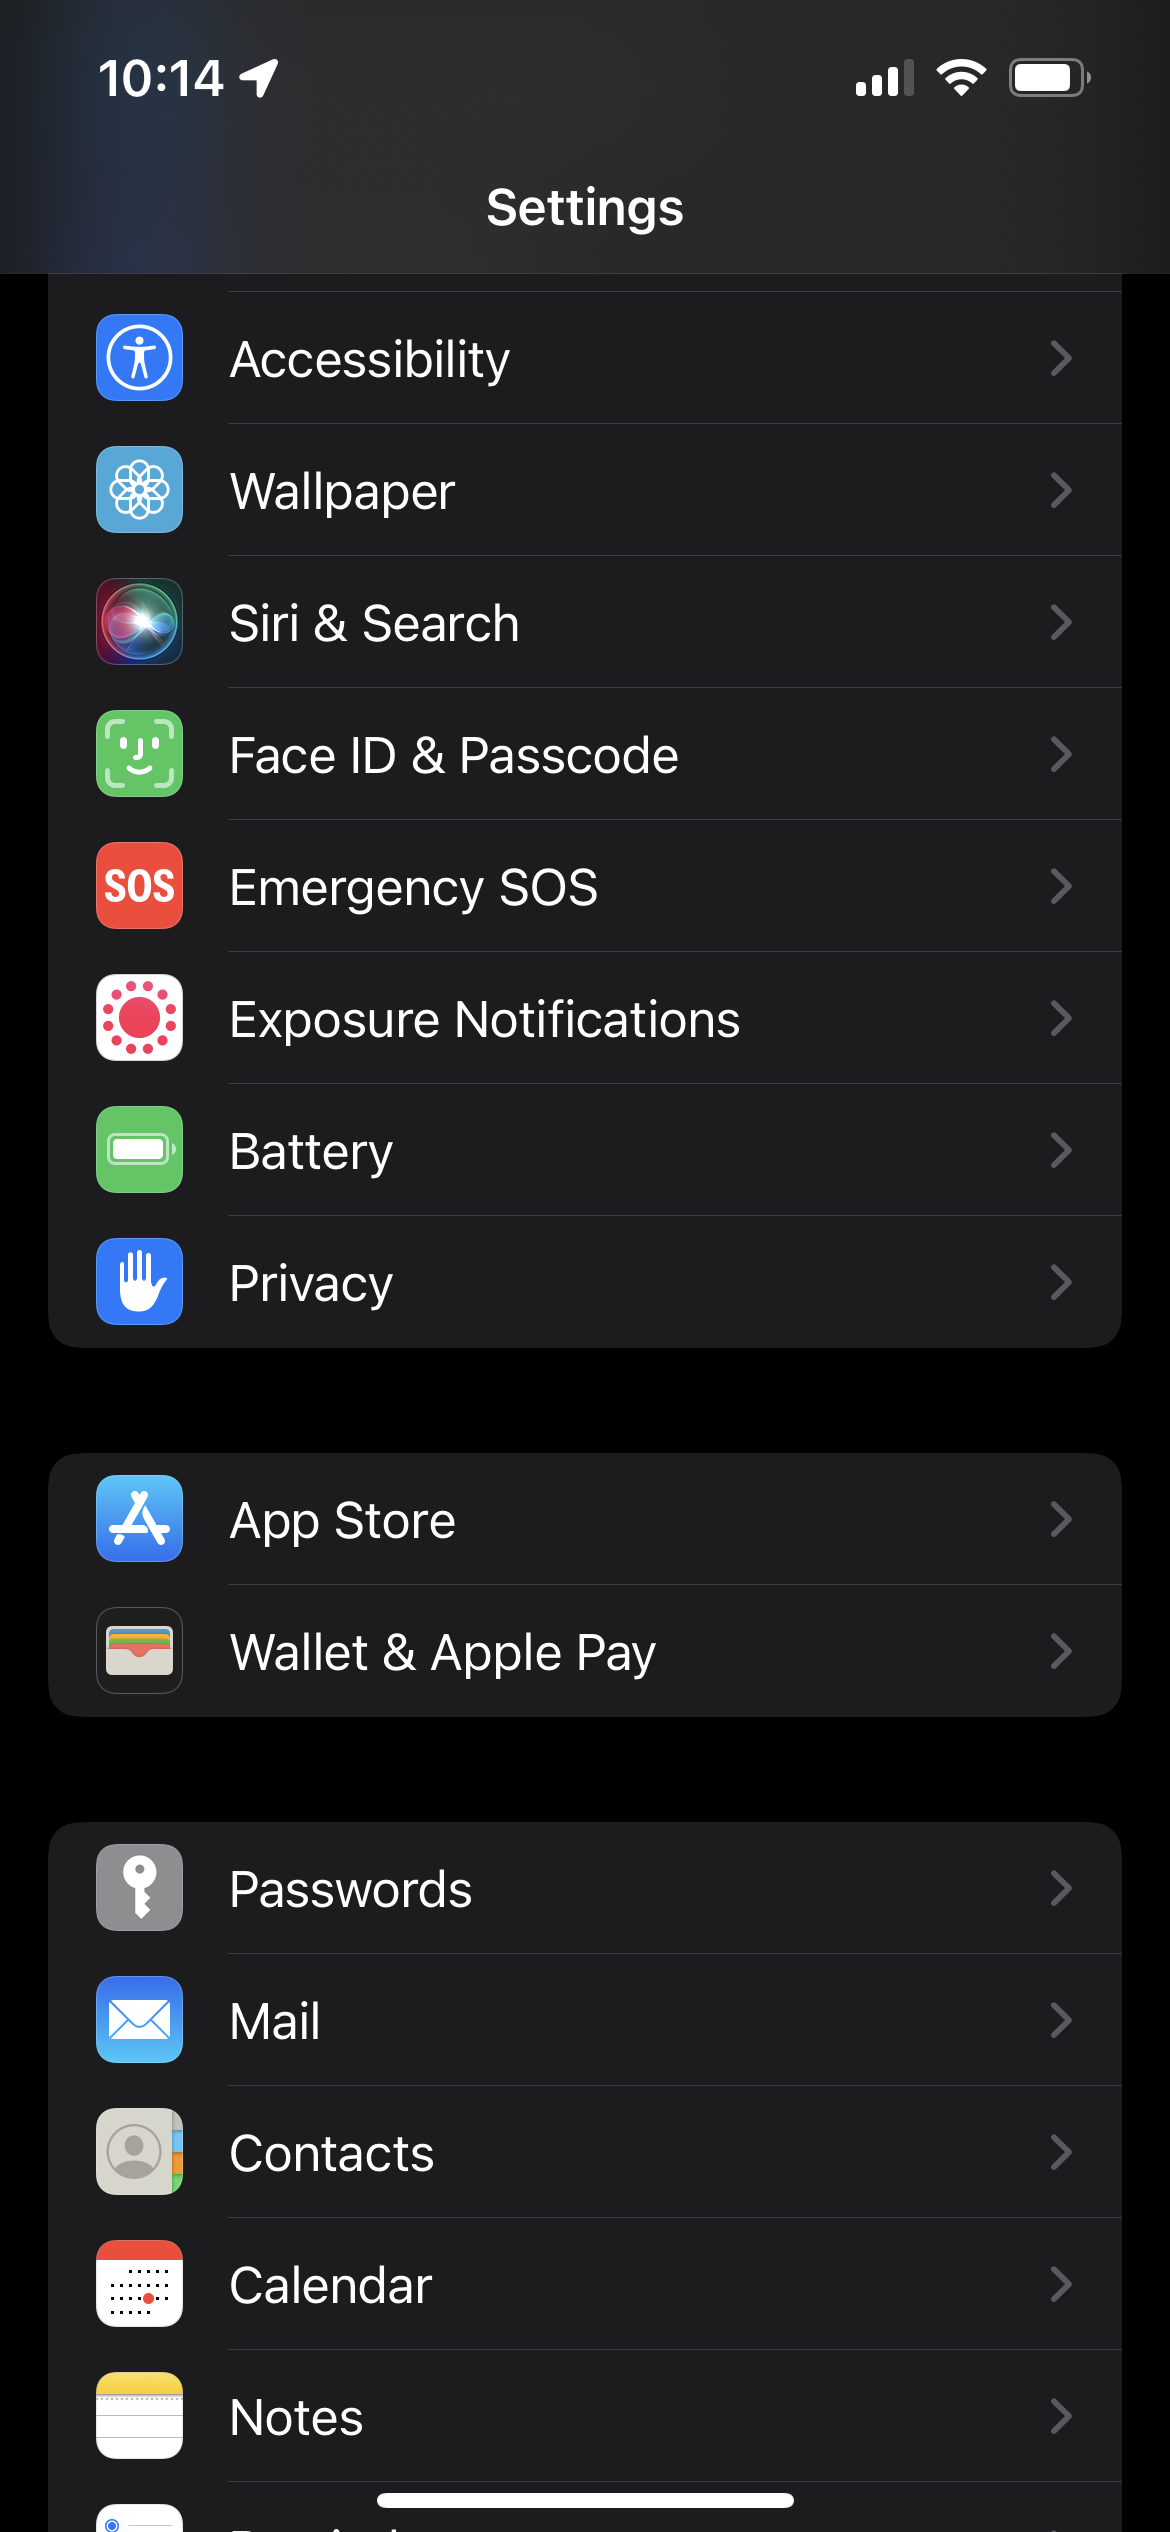 Privacy in iOS 15 Settings